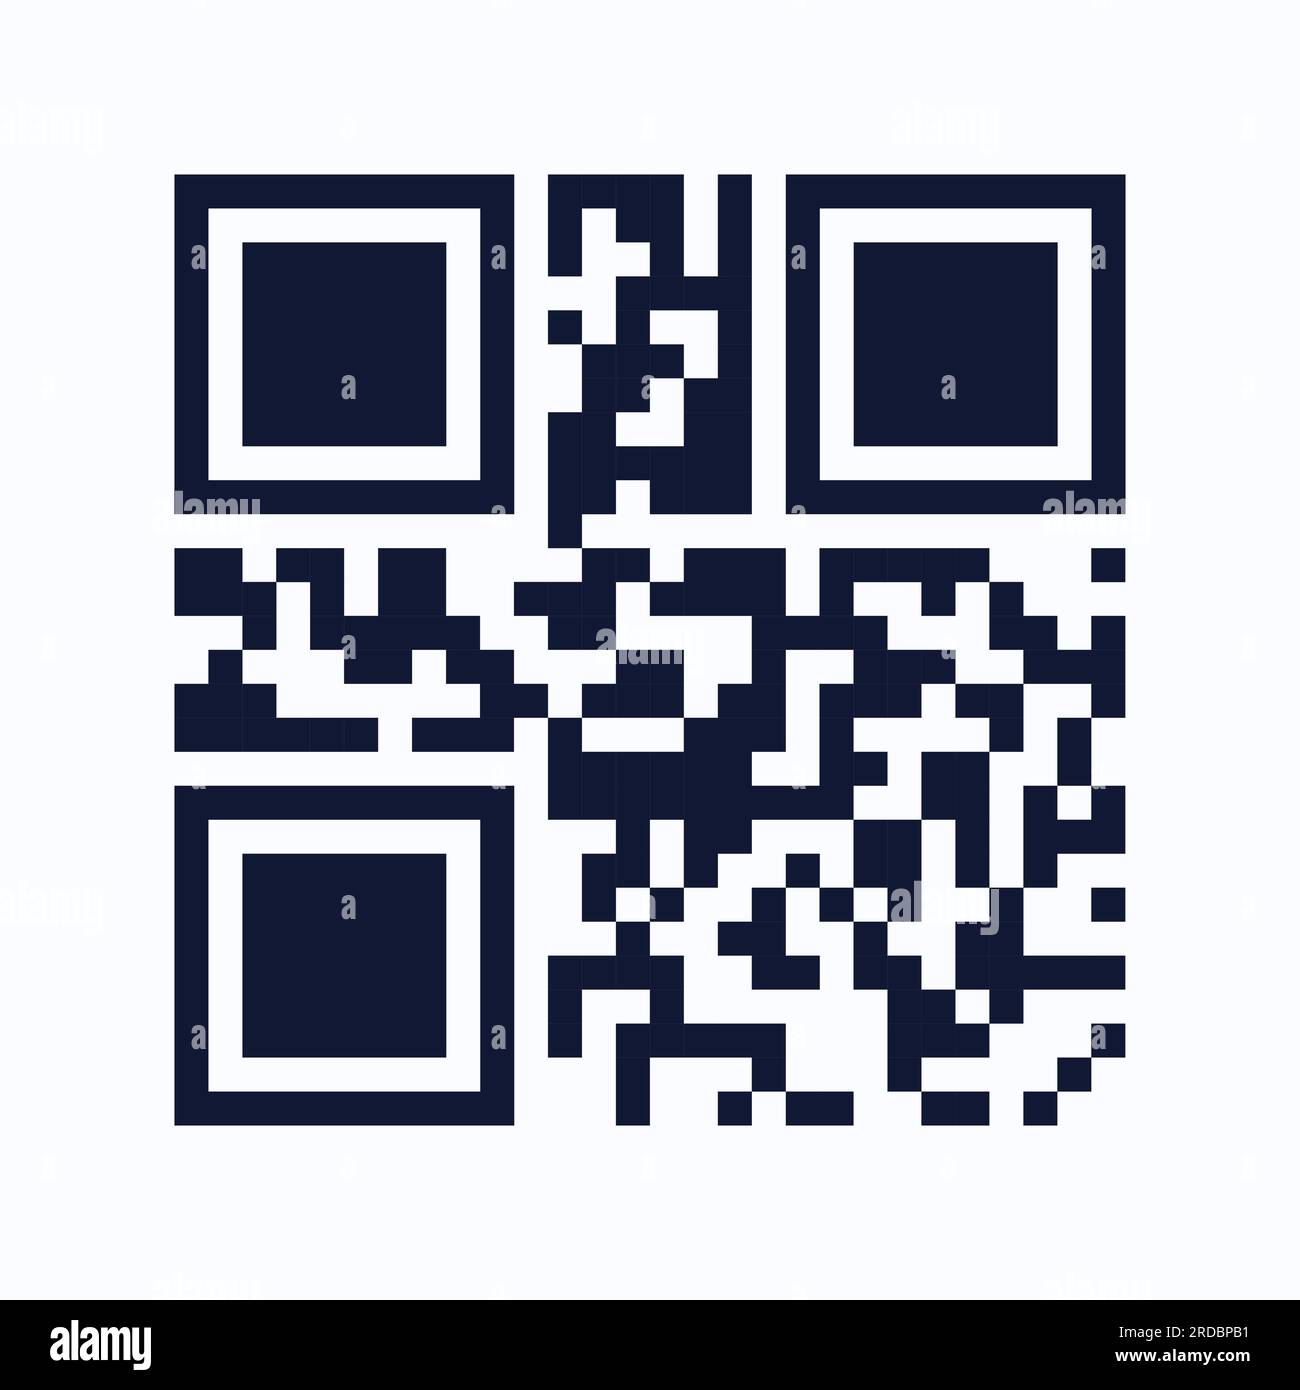 QR code. Quick Response code. Marketing and inventory management